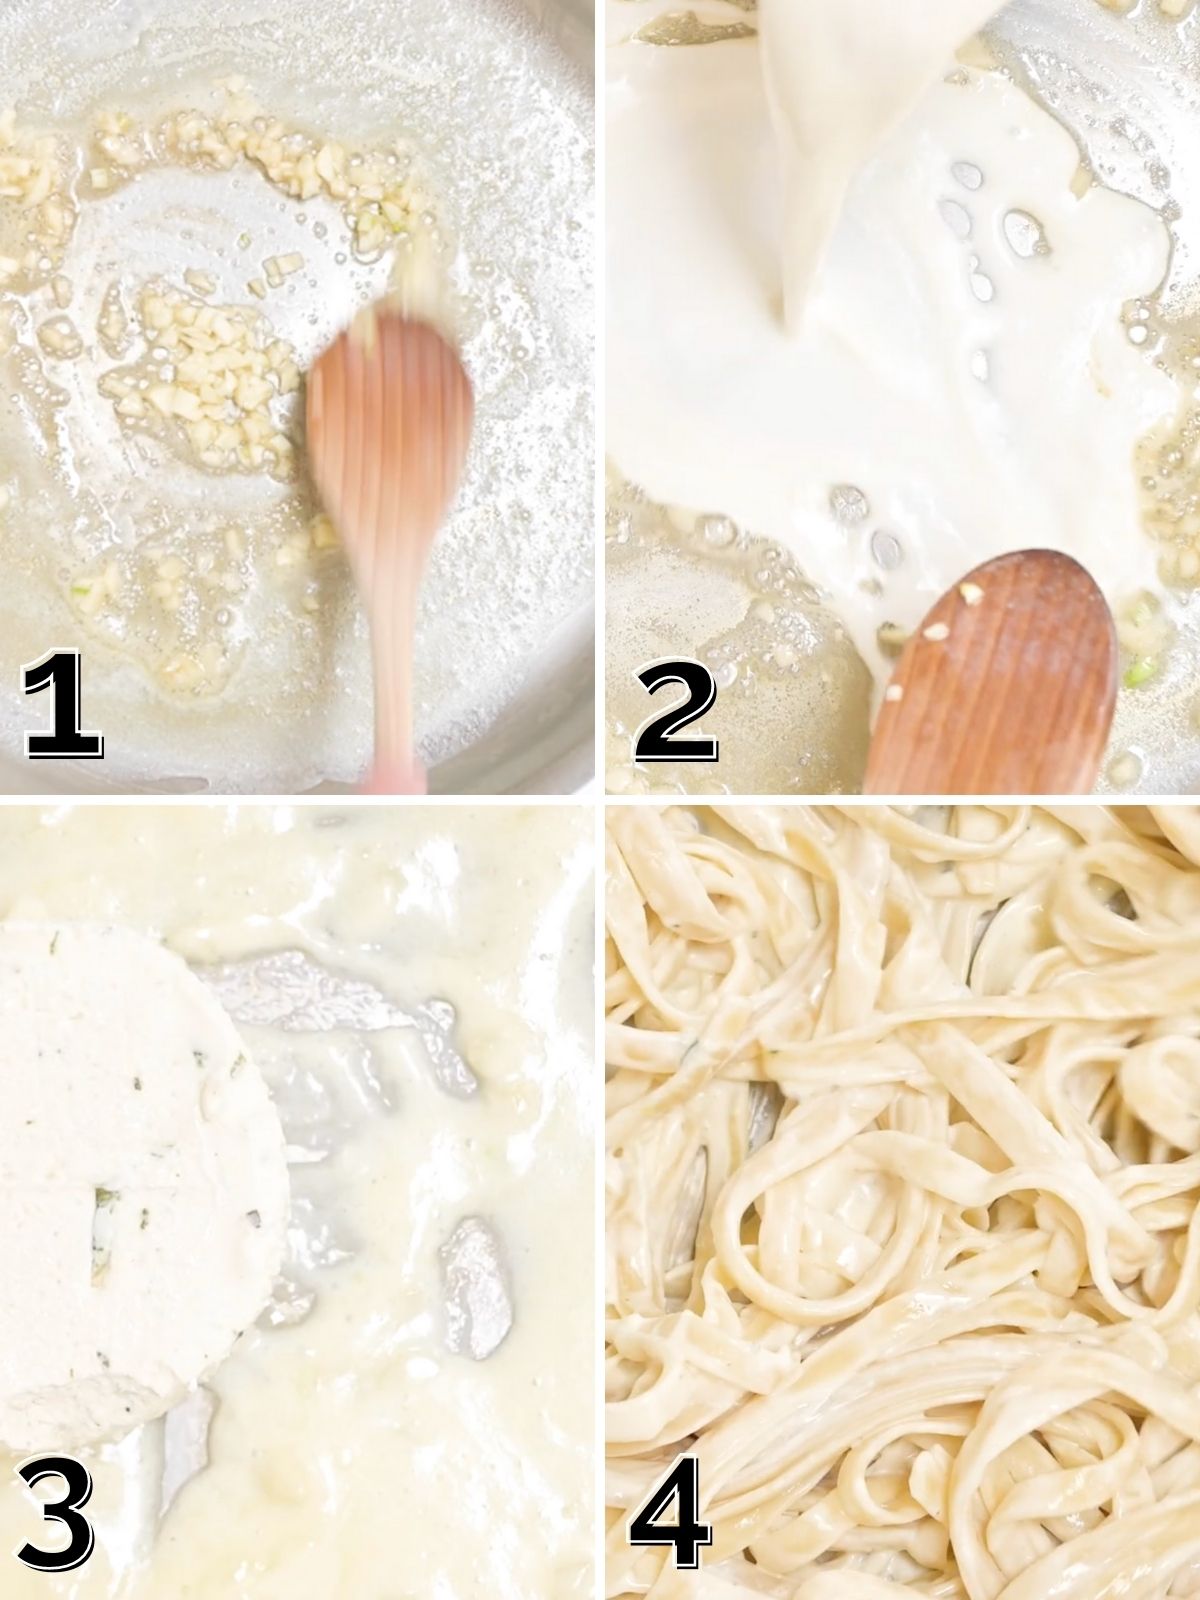 How to Make Boursin Cheese Pasta - Twin To Table